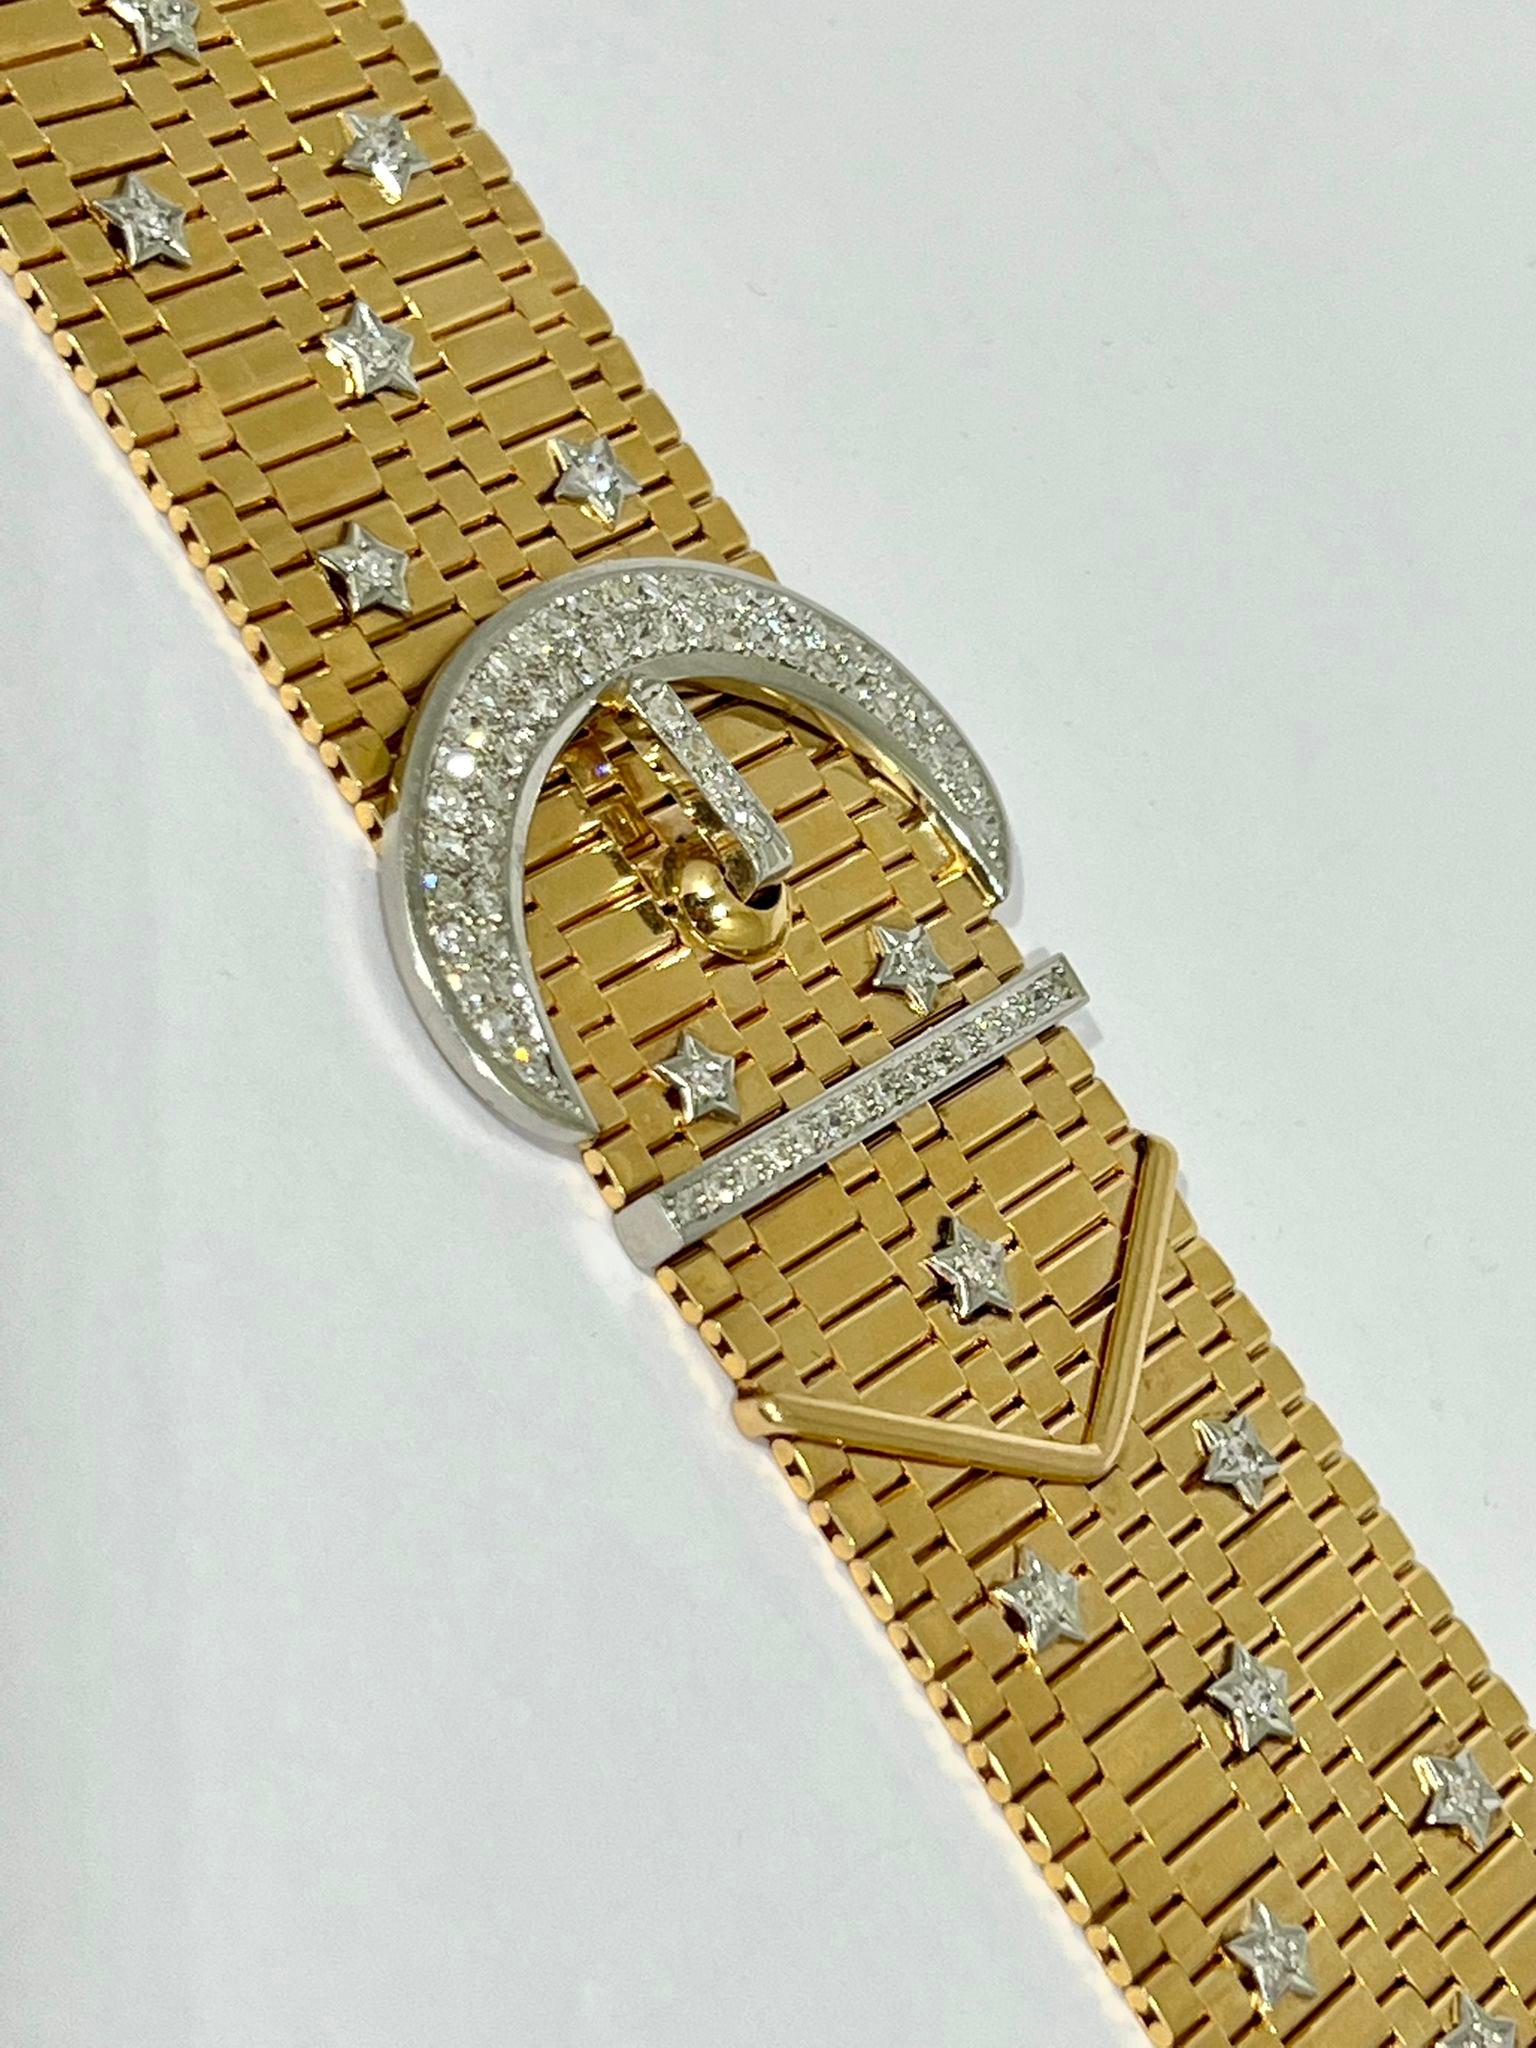 1940´s Chevalier bracelet with diamonds in stars in  18k yellow and platinum
Beautiful and classic belt design bracelet in excellent condition and beautiful to wear 
Weight: 150gr.
Length 21cm, /  8,26 inches 
Width 4,3cm   /  1,69 inches 

READY TO